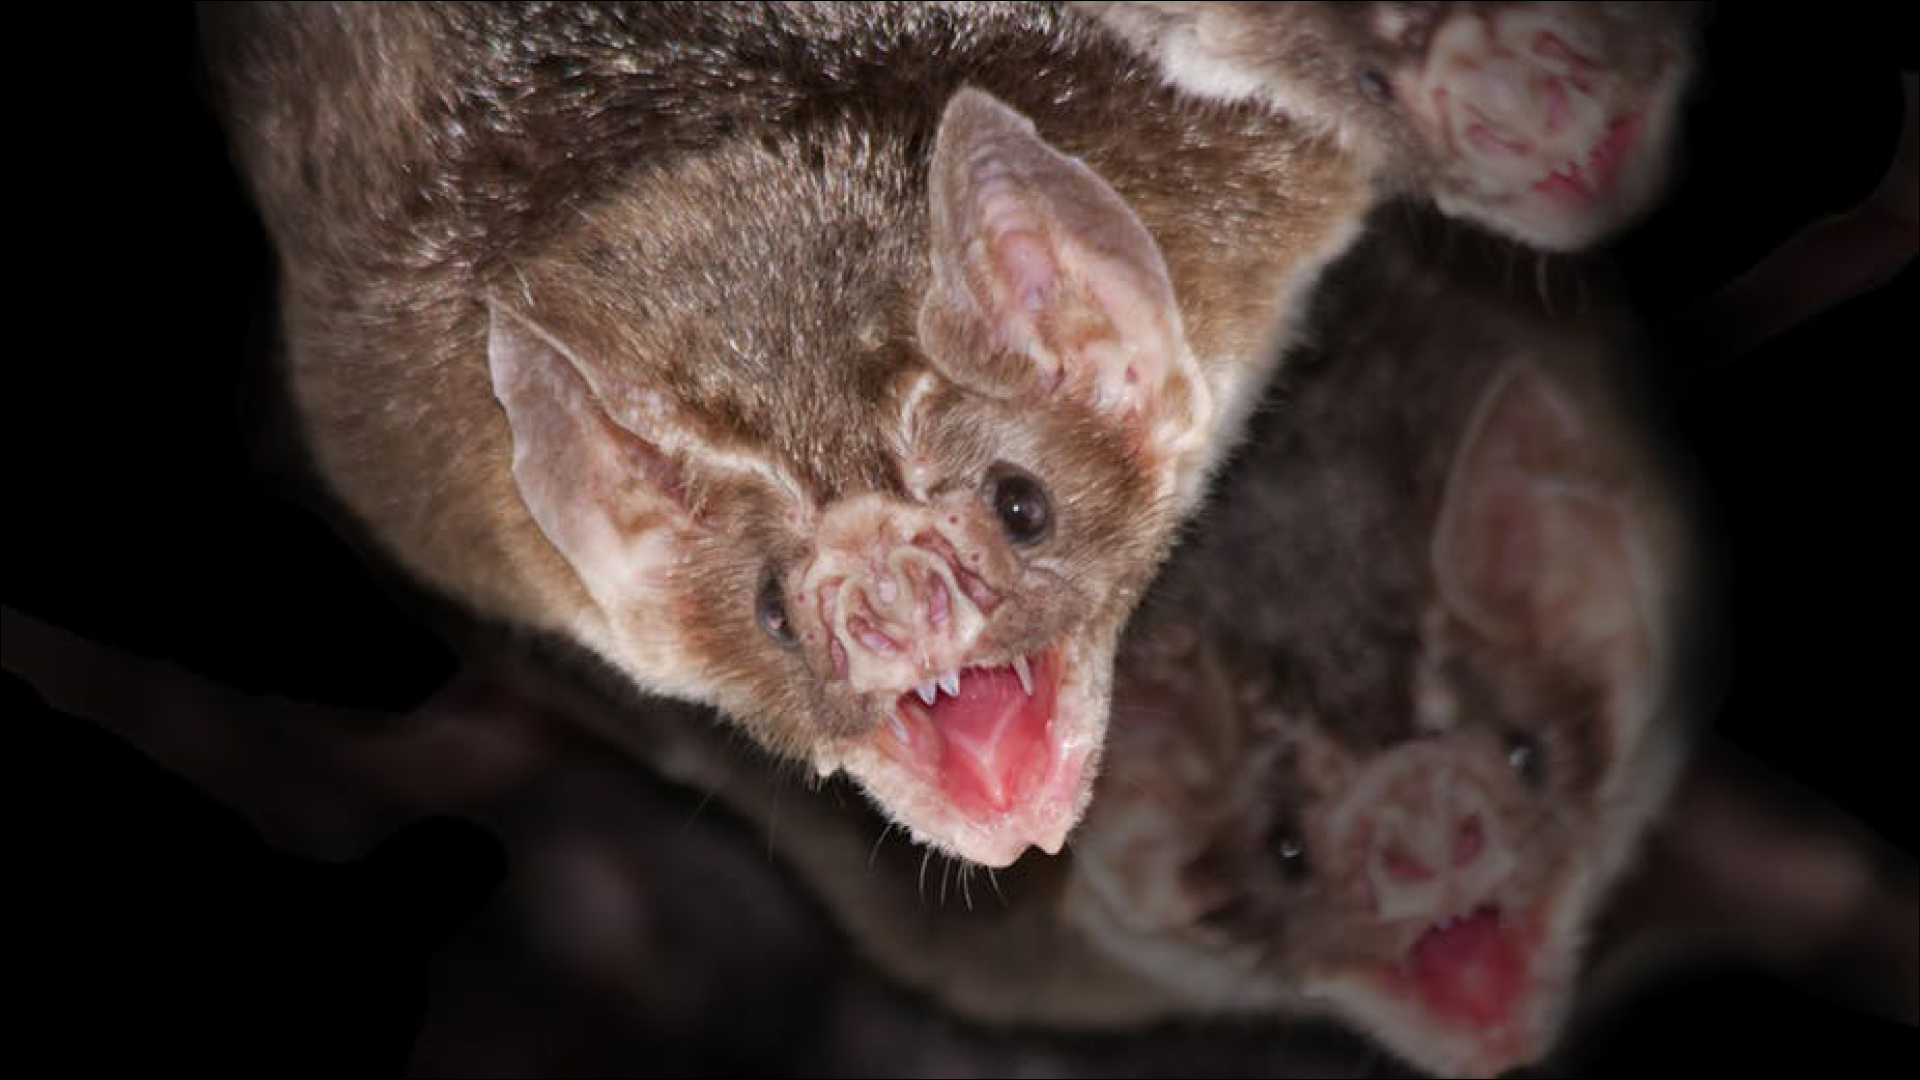 Bats hanging with open mouth